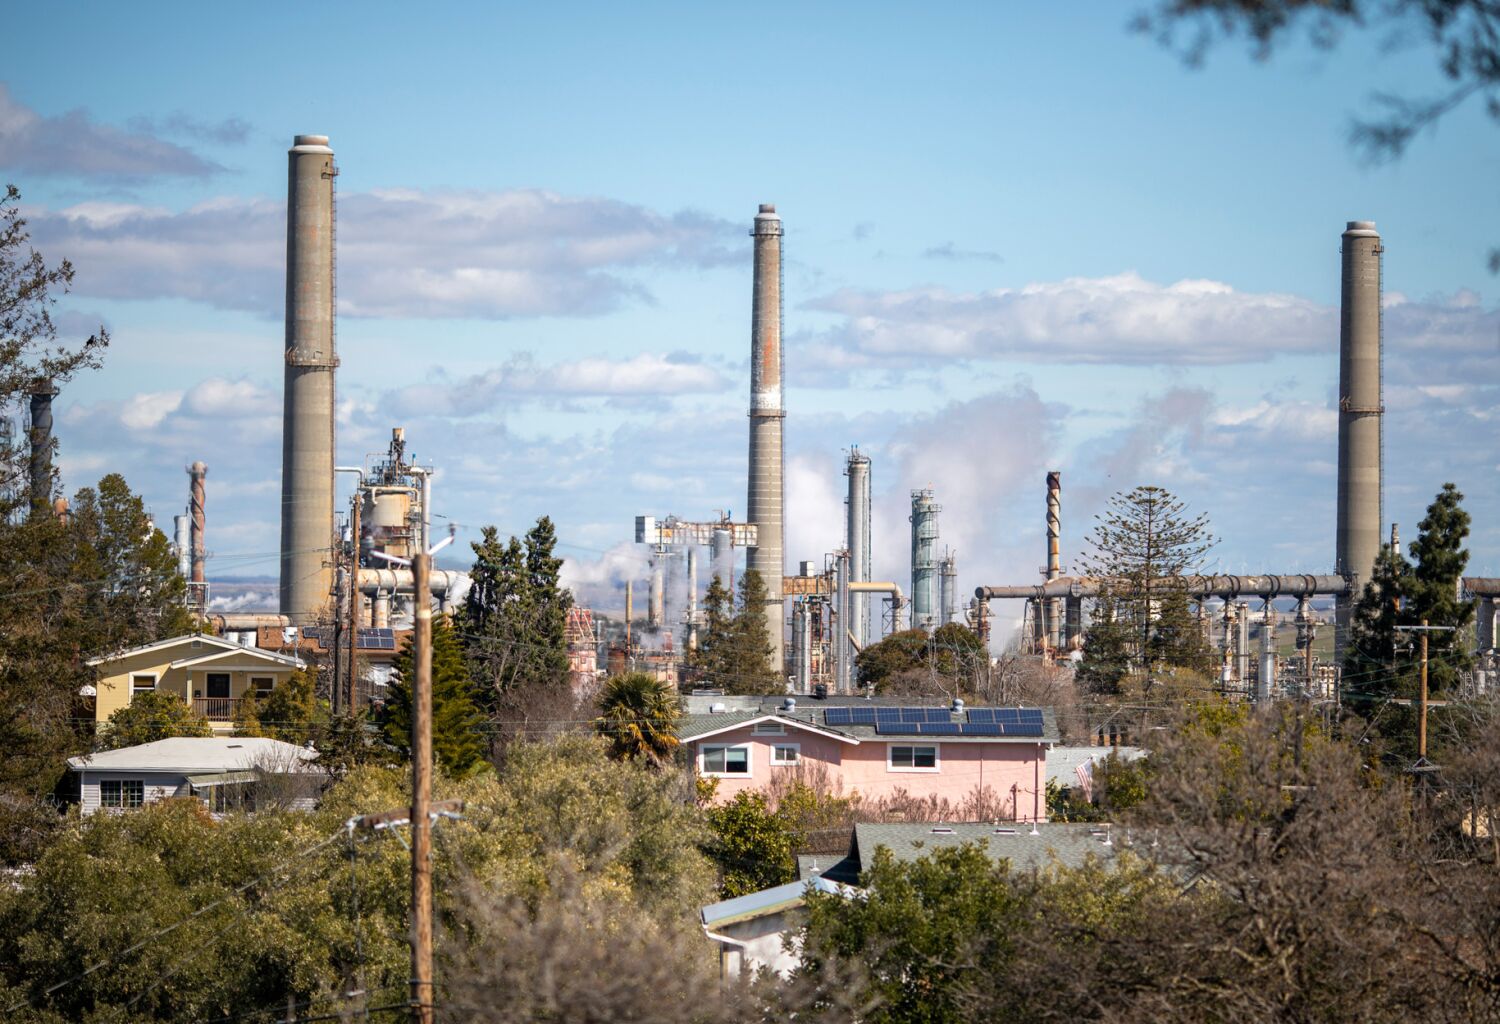 The fallout from the Bay Area refinery yields no significant health